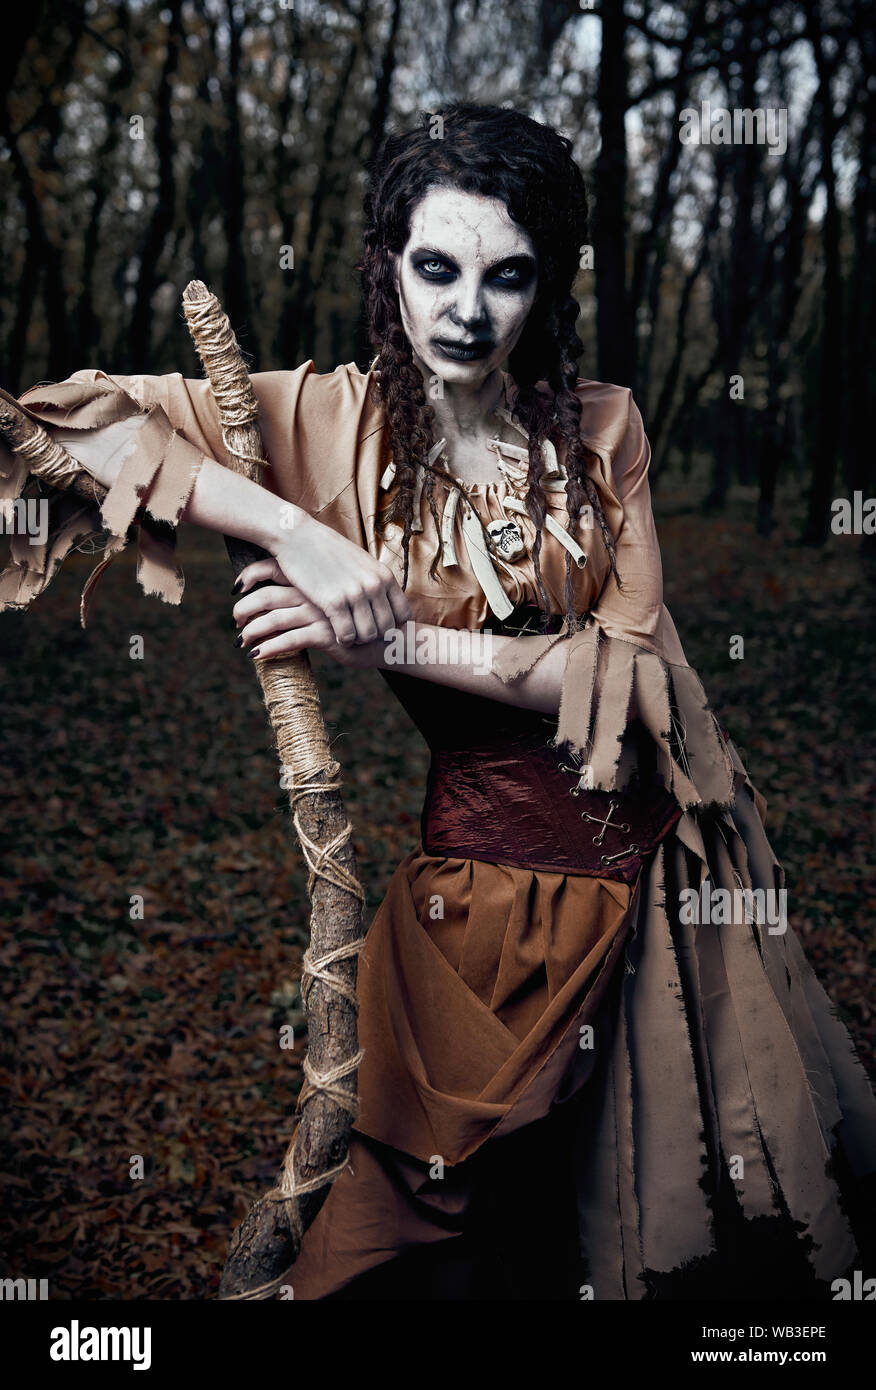 Halloween theme: wicked scary voodoo witch with staff. Portrait of the evil sorceress in dark grove. Zombie woman (undead) Stock Photo